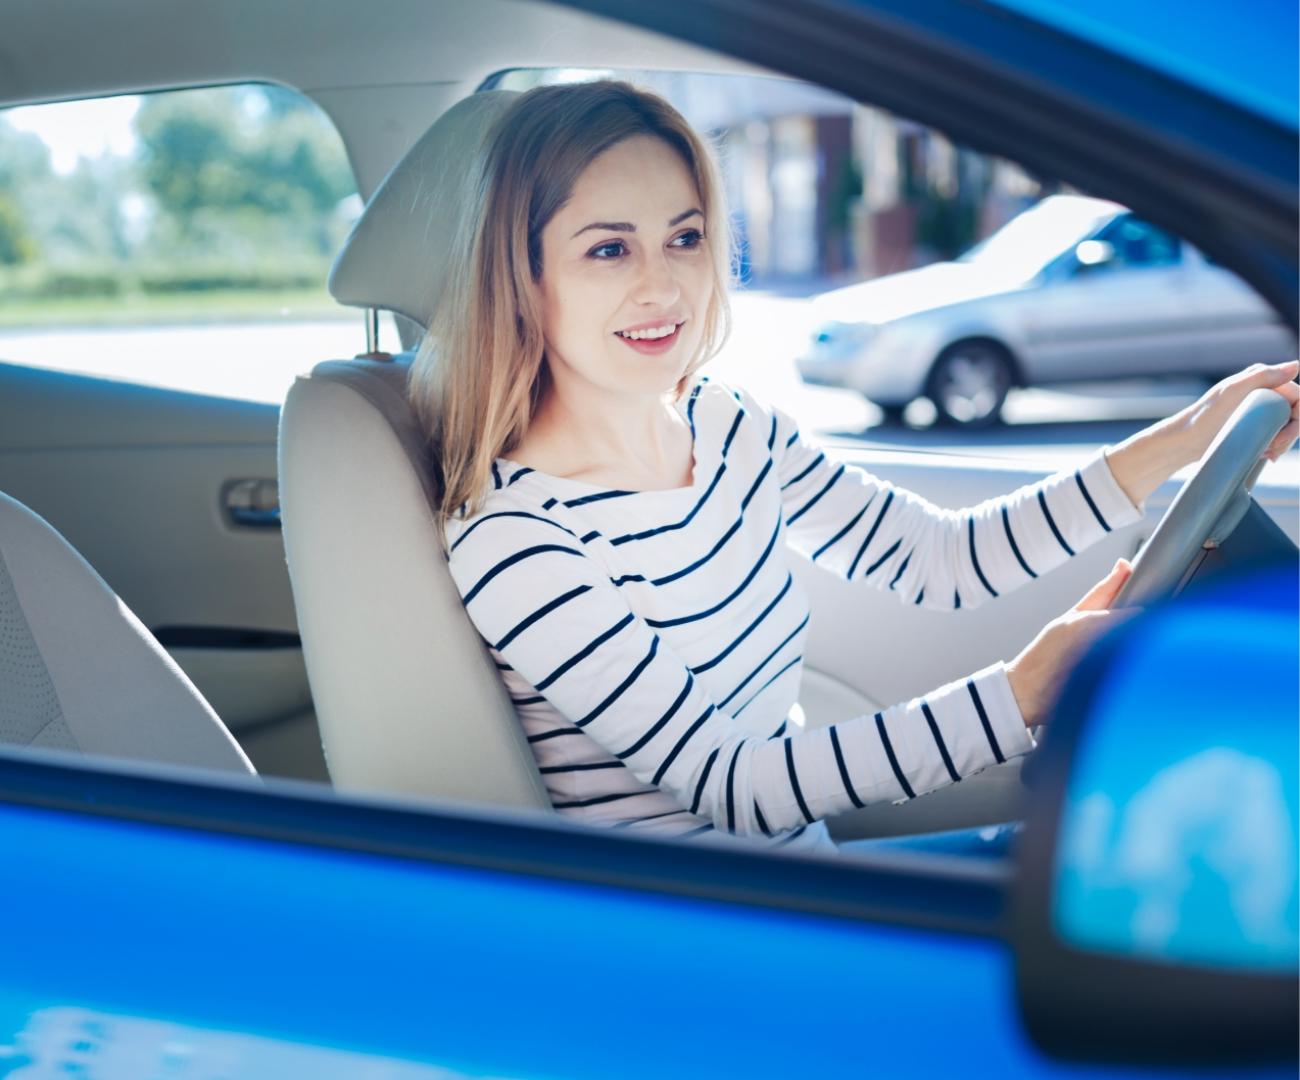 Smiling woman driving a blue car.